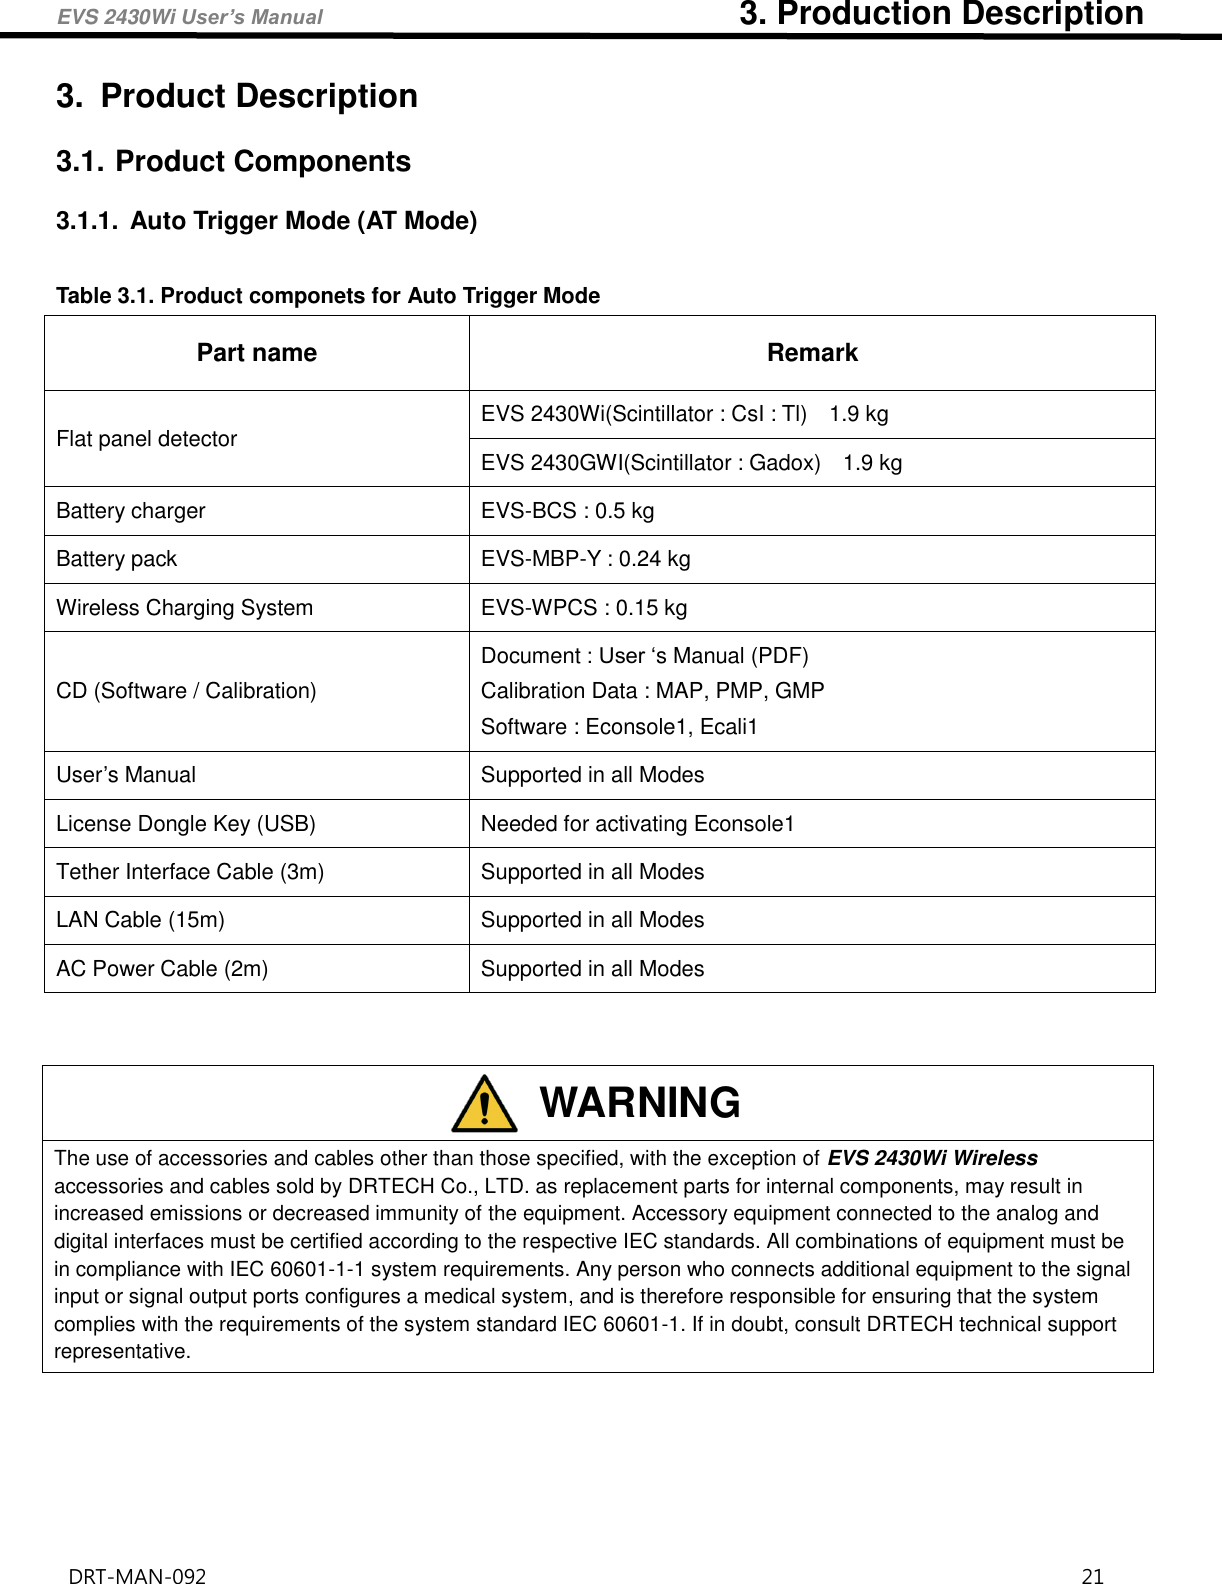 EVS 2430Wi User’s Manual                                                  3. Production Description DRT-MAN-092                                                                                    21   3.  Product Description 3.1. Product Components 3.1.1.  Auto Trigger Mode (AT Mode)  Table 3.1. Product componets for Auto Trigger Mode Part name Remark Flat panel detector EVS 2430Wi(Scintillator : CsI : Tl)    1.9 kg EVS 2430GWI(Scintillator : Gadox)    1.9 kg Battery charger   EVS-BCS : 0.5 kg Battery pack EVS-MBP-Y : 0.24 kg Wireless Charging System EVS-WPCS : 0.15 kg CD (Software / Calibration) Document : User ‘s Manual (PDF)   Calibration Data : MAP, PMP, GMP Software : Econsole1, Ecali1 User’s Manual   Supported in all Modes License Dongle Key (USB) Needed for activating Econsole1 Tether Interface Cable (3m)   Supported in all Modes LAN Cable (15m) Supported in all Modes AC Power Cable (2m) Supported in all Modes    WARNING The use of accessories and cables other than those specified, with the exception of EVS 2430Wi Wireless accessories and cables sold by DRTECH Co., LTD. as replacement parts for internal components, may result in increased emissions or decreased immunity of the equipment. Accessory equipment connected to the analog and digital interfaces must be certified according to the respective IEC standards. All combinations of equipment must be in compliance with IEC 60601-1-1 system requirements. Any person who connects additional equipment to the signal input or signal output ports configures a medical system, and is therefore responsible for ensuring that the system complies with the requirements of the system standard IEC 60601-1. If in doubt, consult DRTECH technical support representative.    